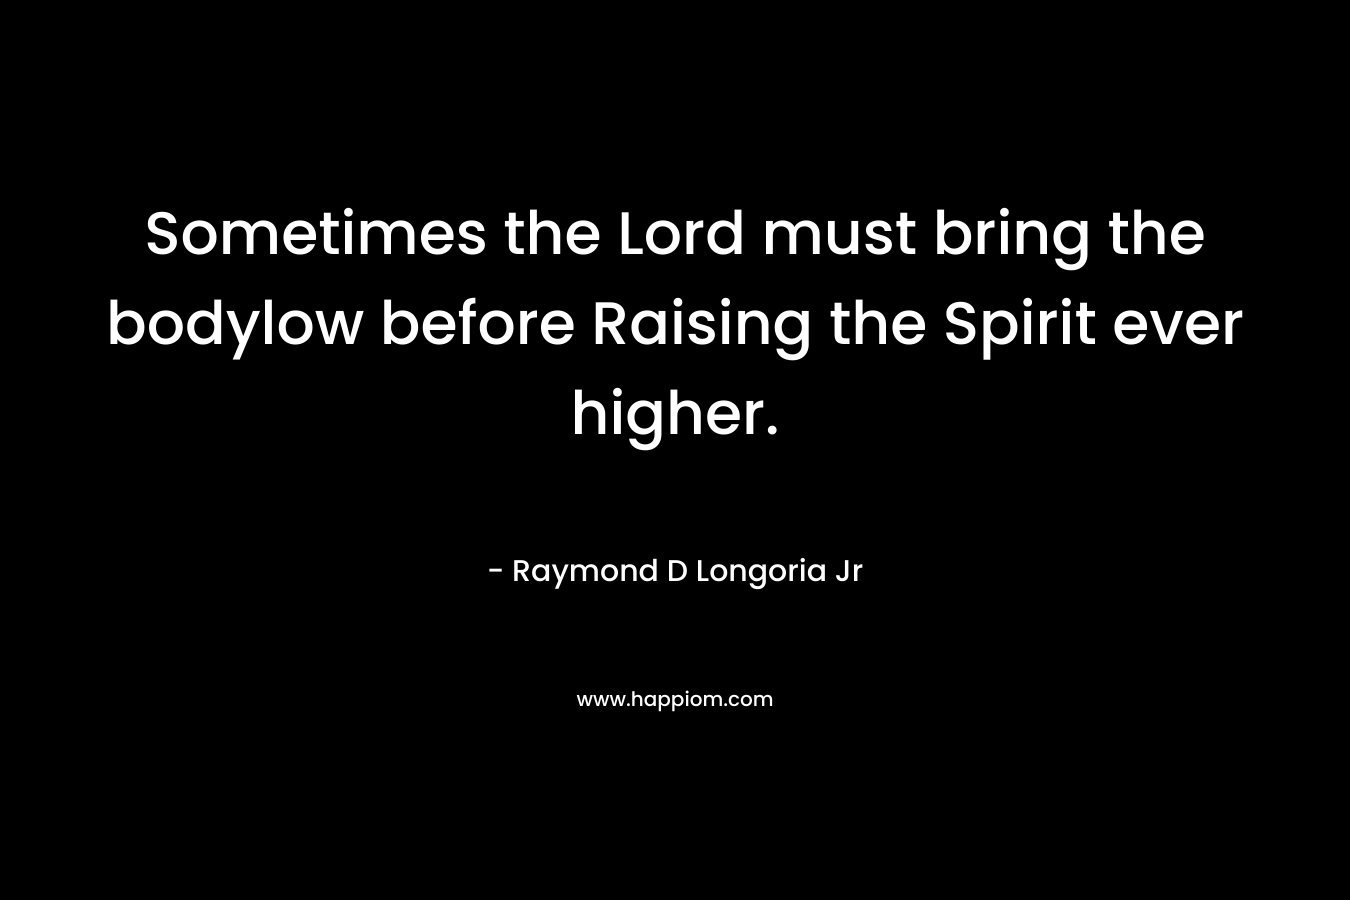 Sometimes the Lord must bring the bodylow before Raising the Spirit ever higher. – Raymond D Longoria Jr